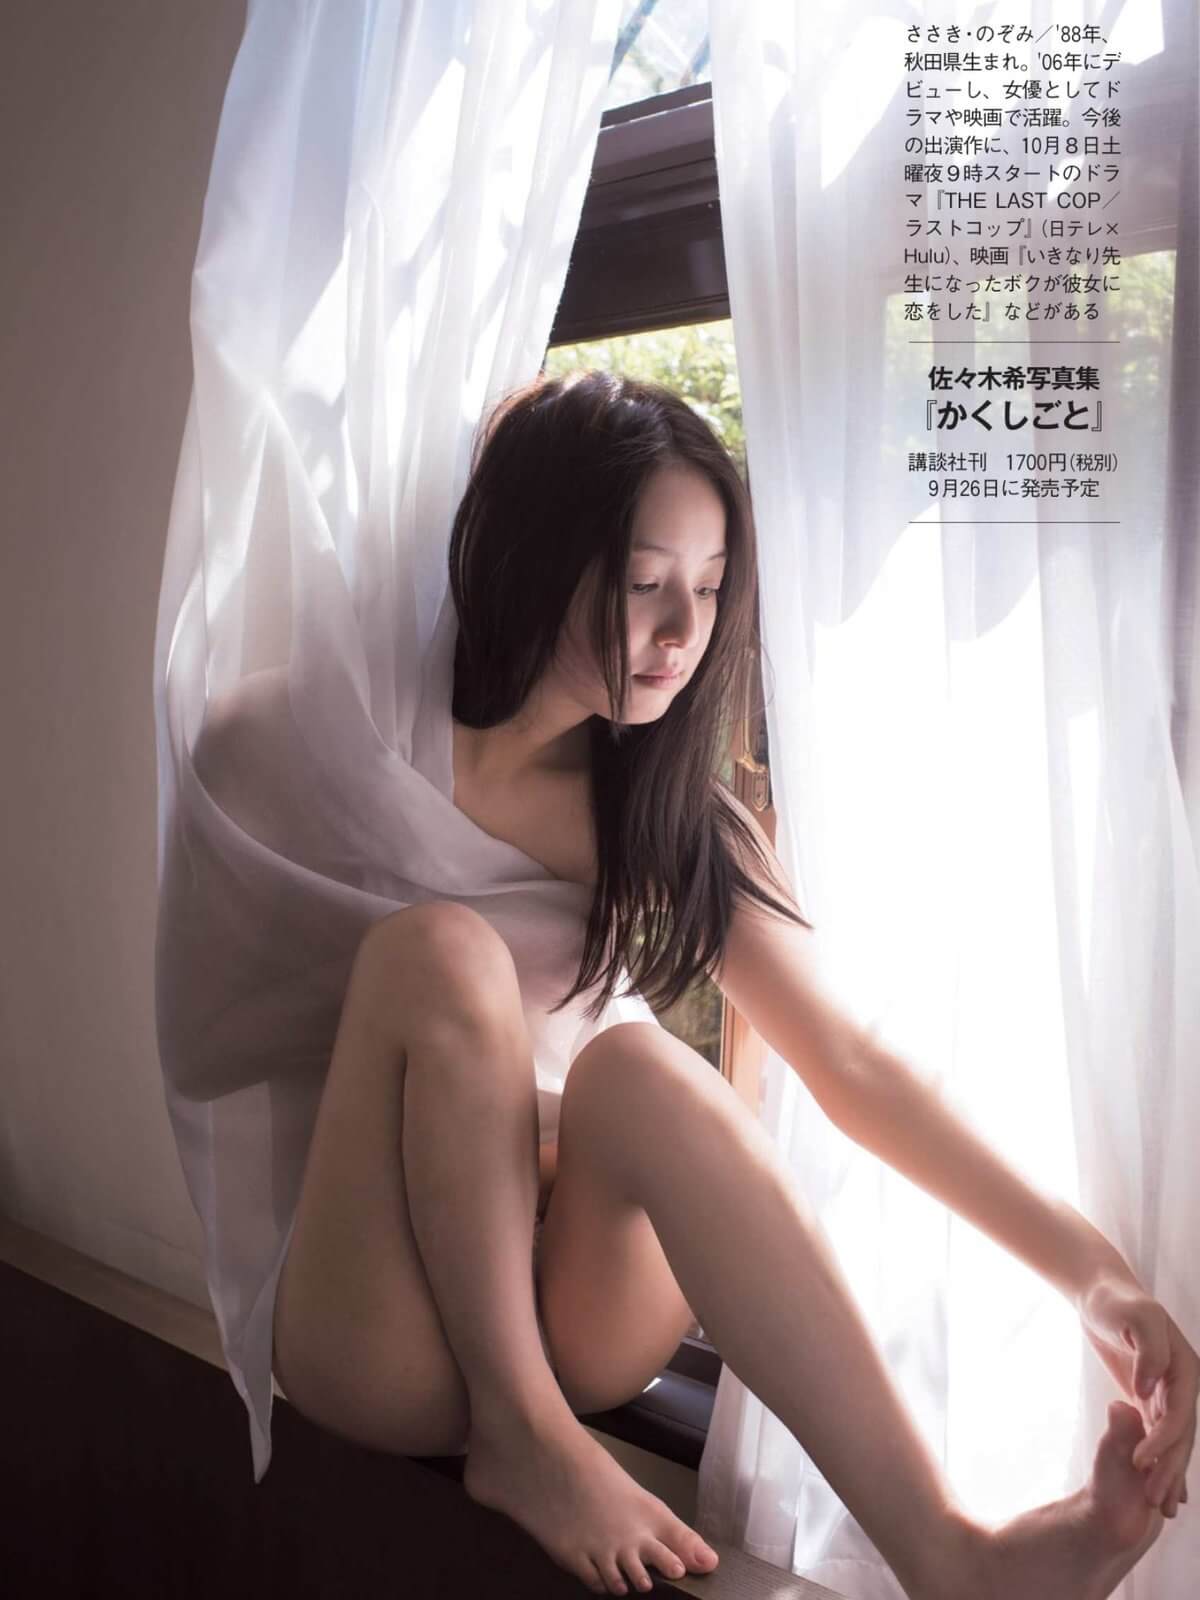 49 Hot Pictures Of Nozomi Sasaki Are Too Damn Appealing | Best Of Comic Books